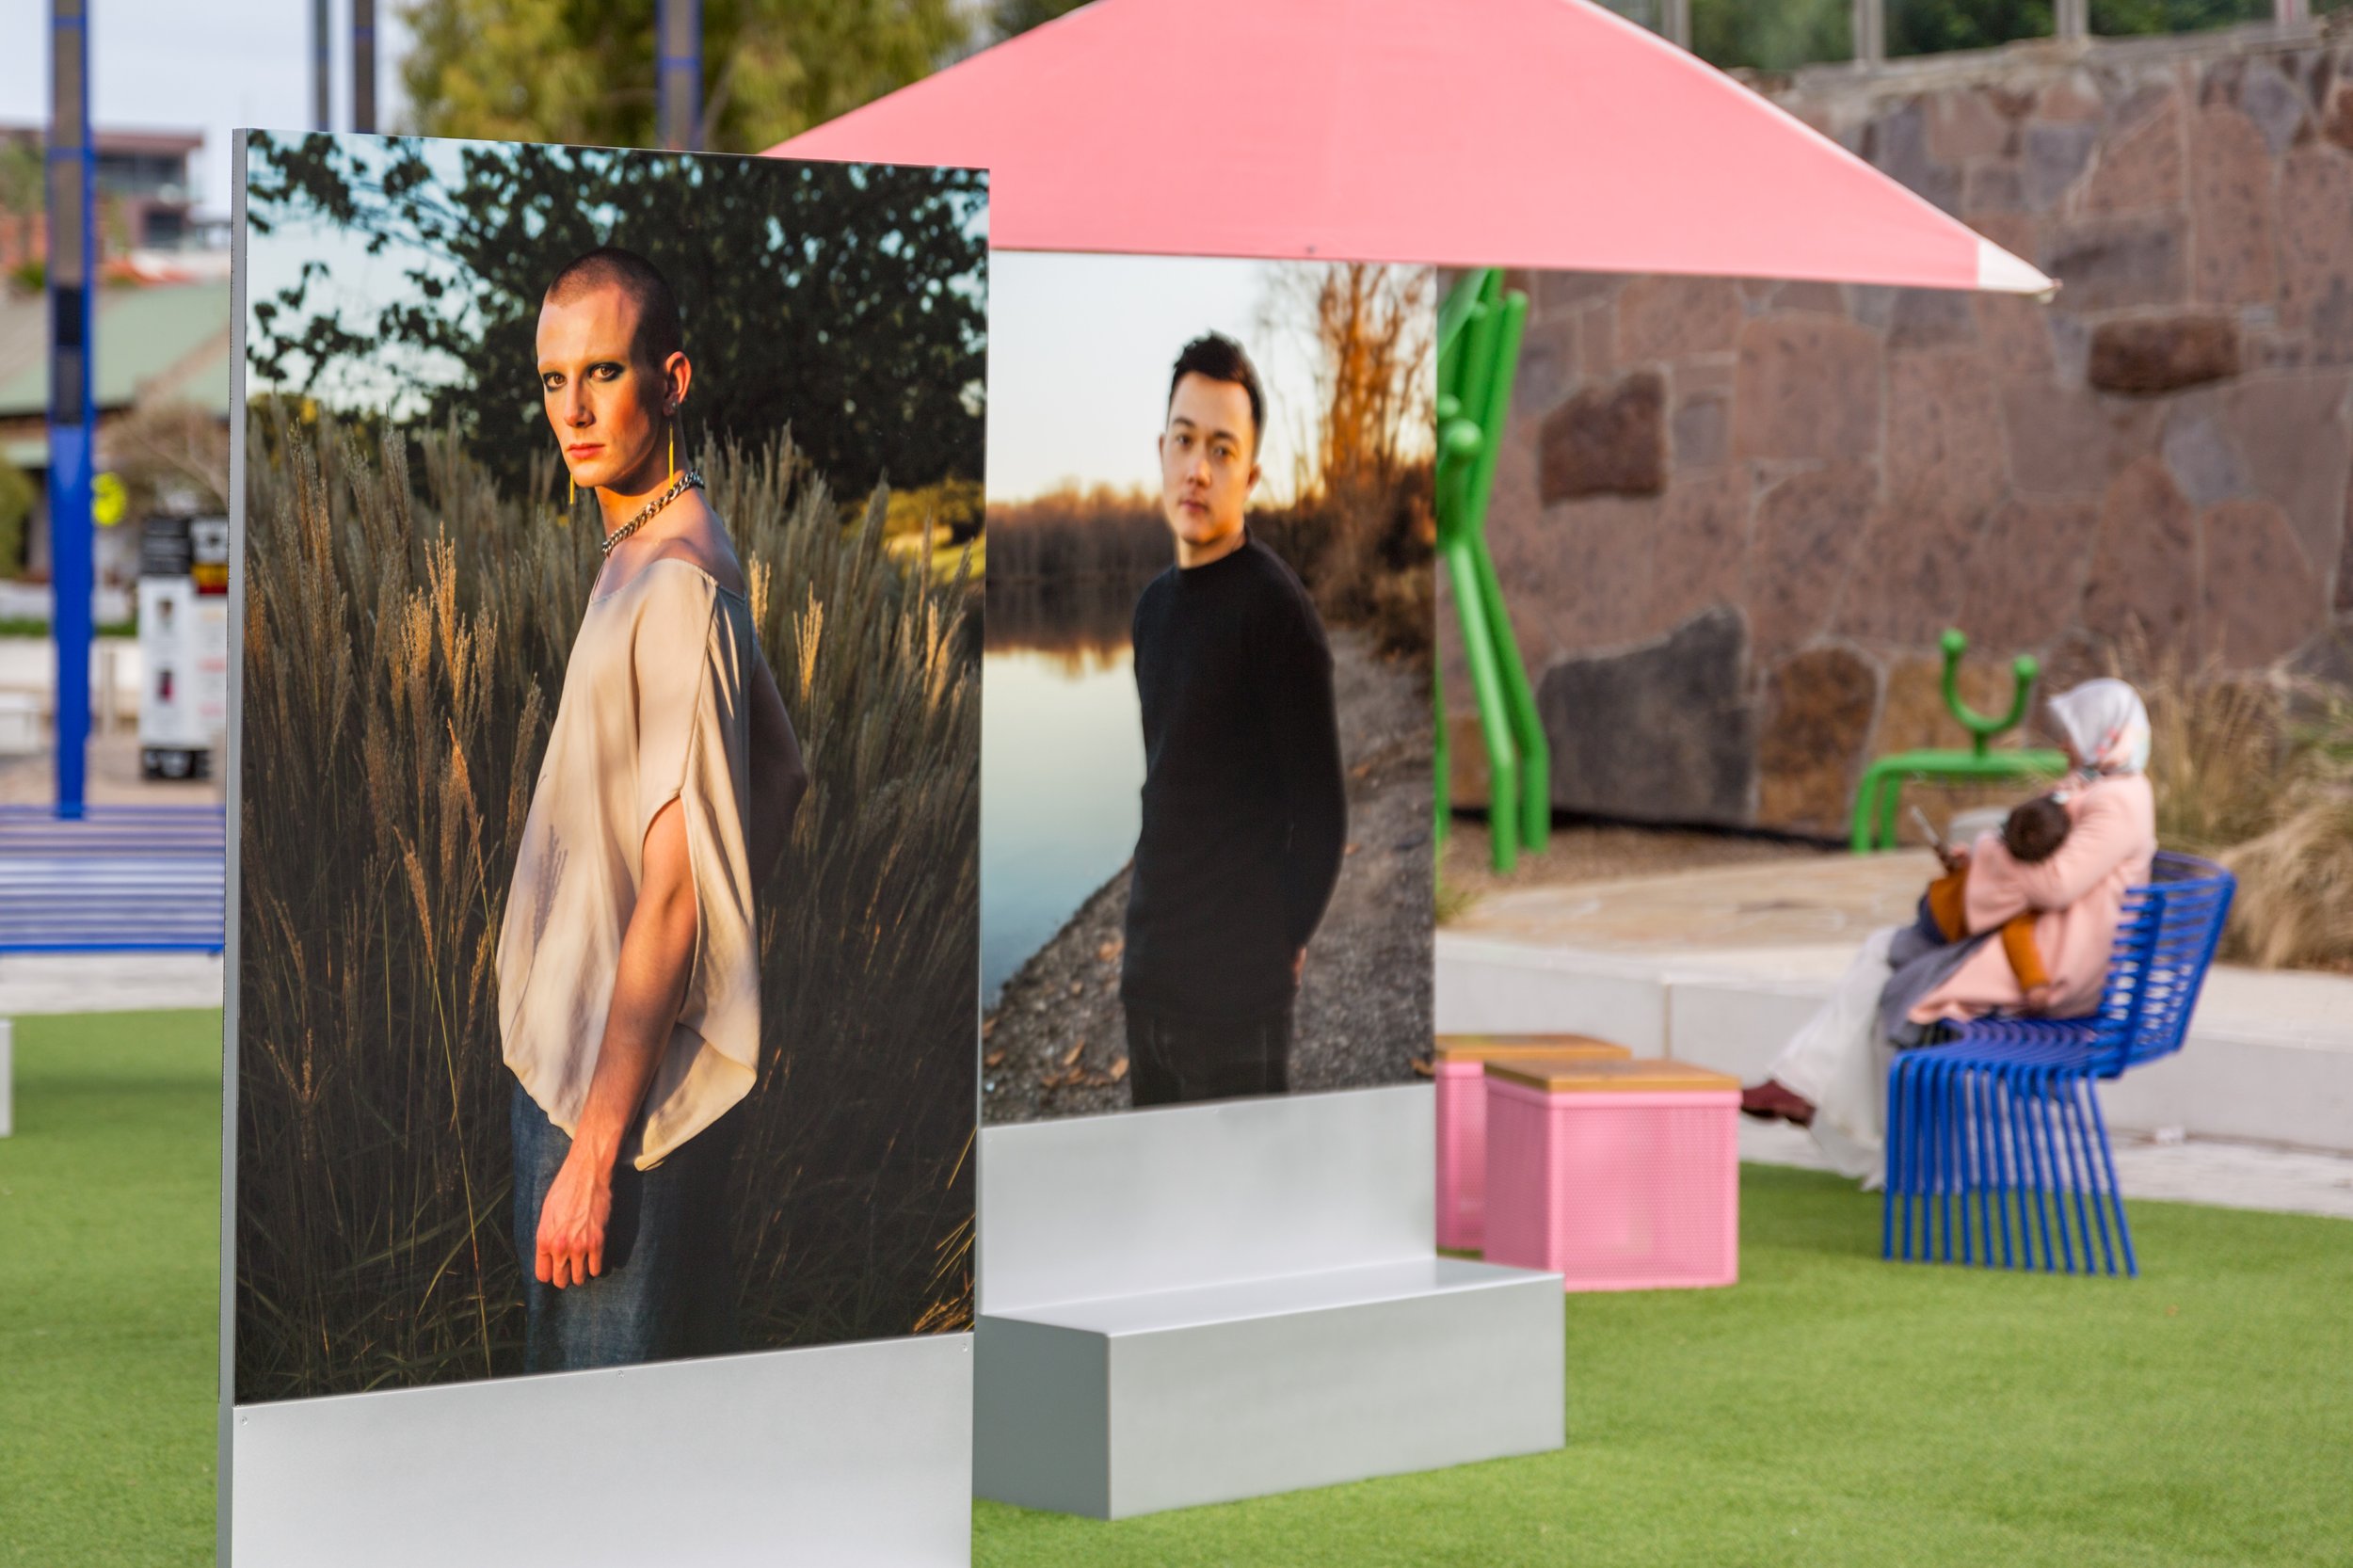   Look at me like you love me , outdoor installation as part of  Photo 2022: Being Human , Prahran Square, Australia, 2022 